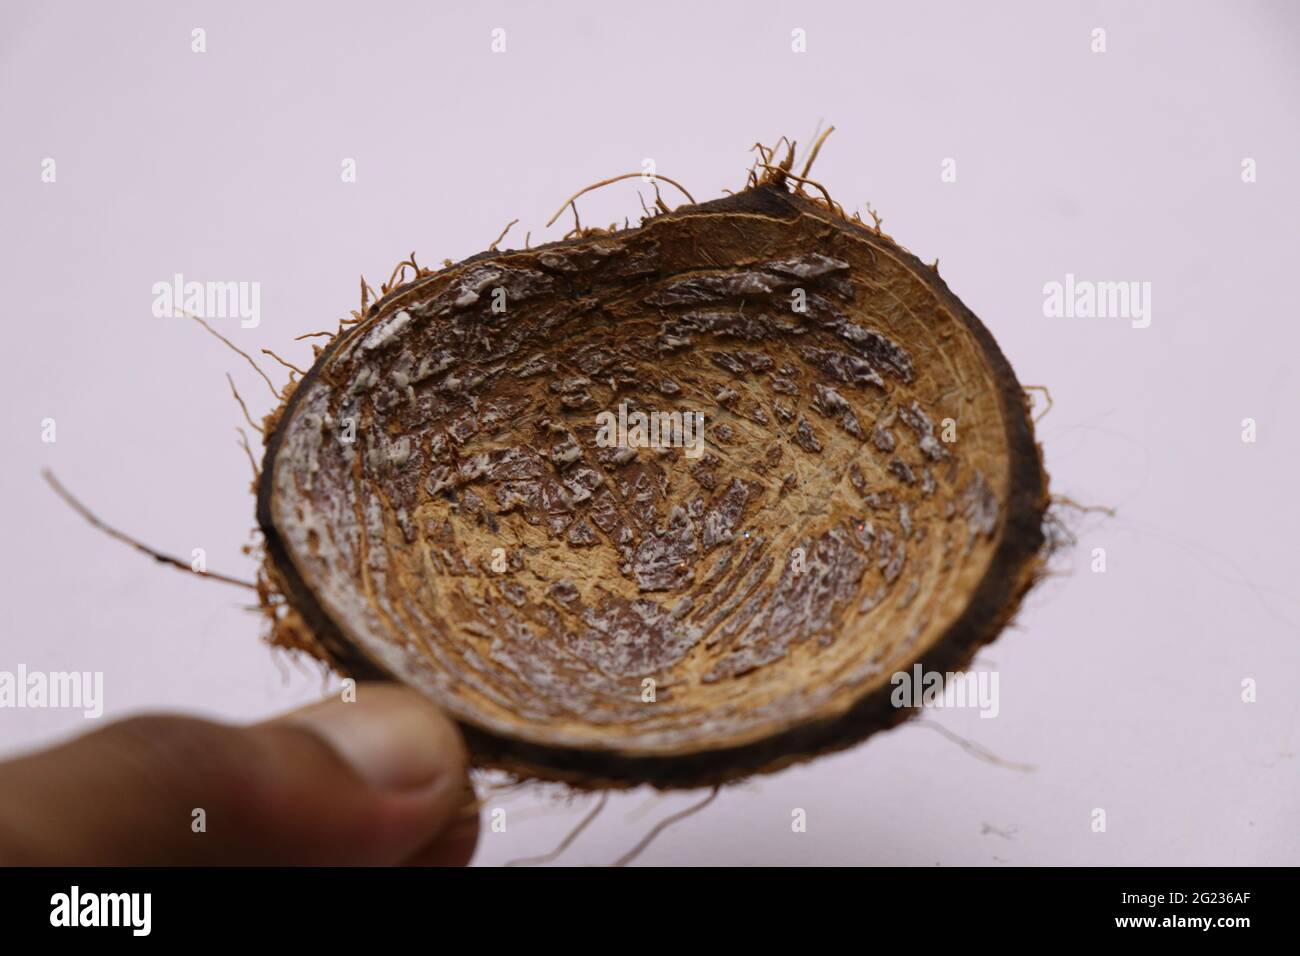 Piece of coconut shell held in hand after scrapping coconut Stock Photo